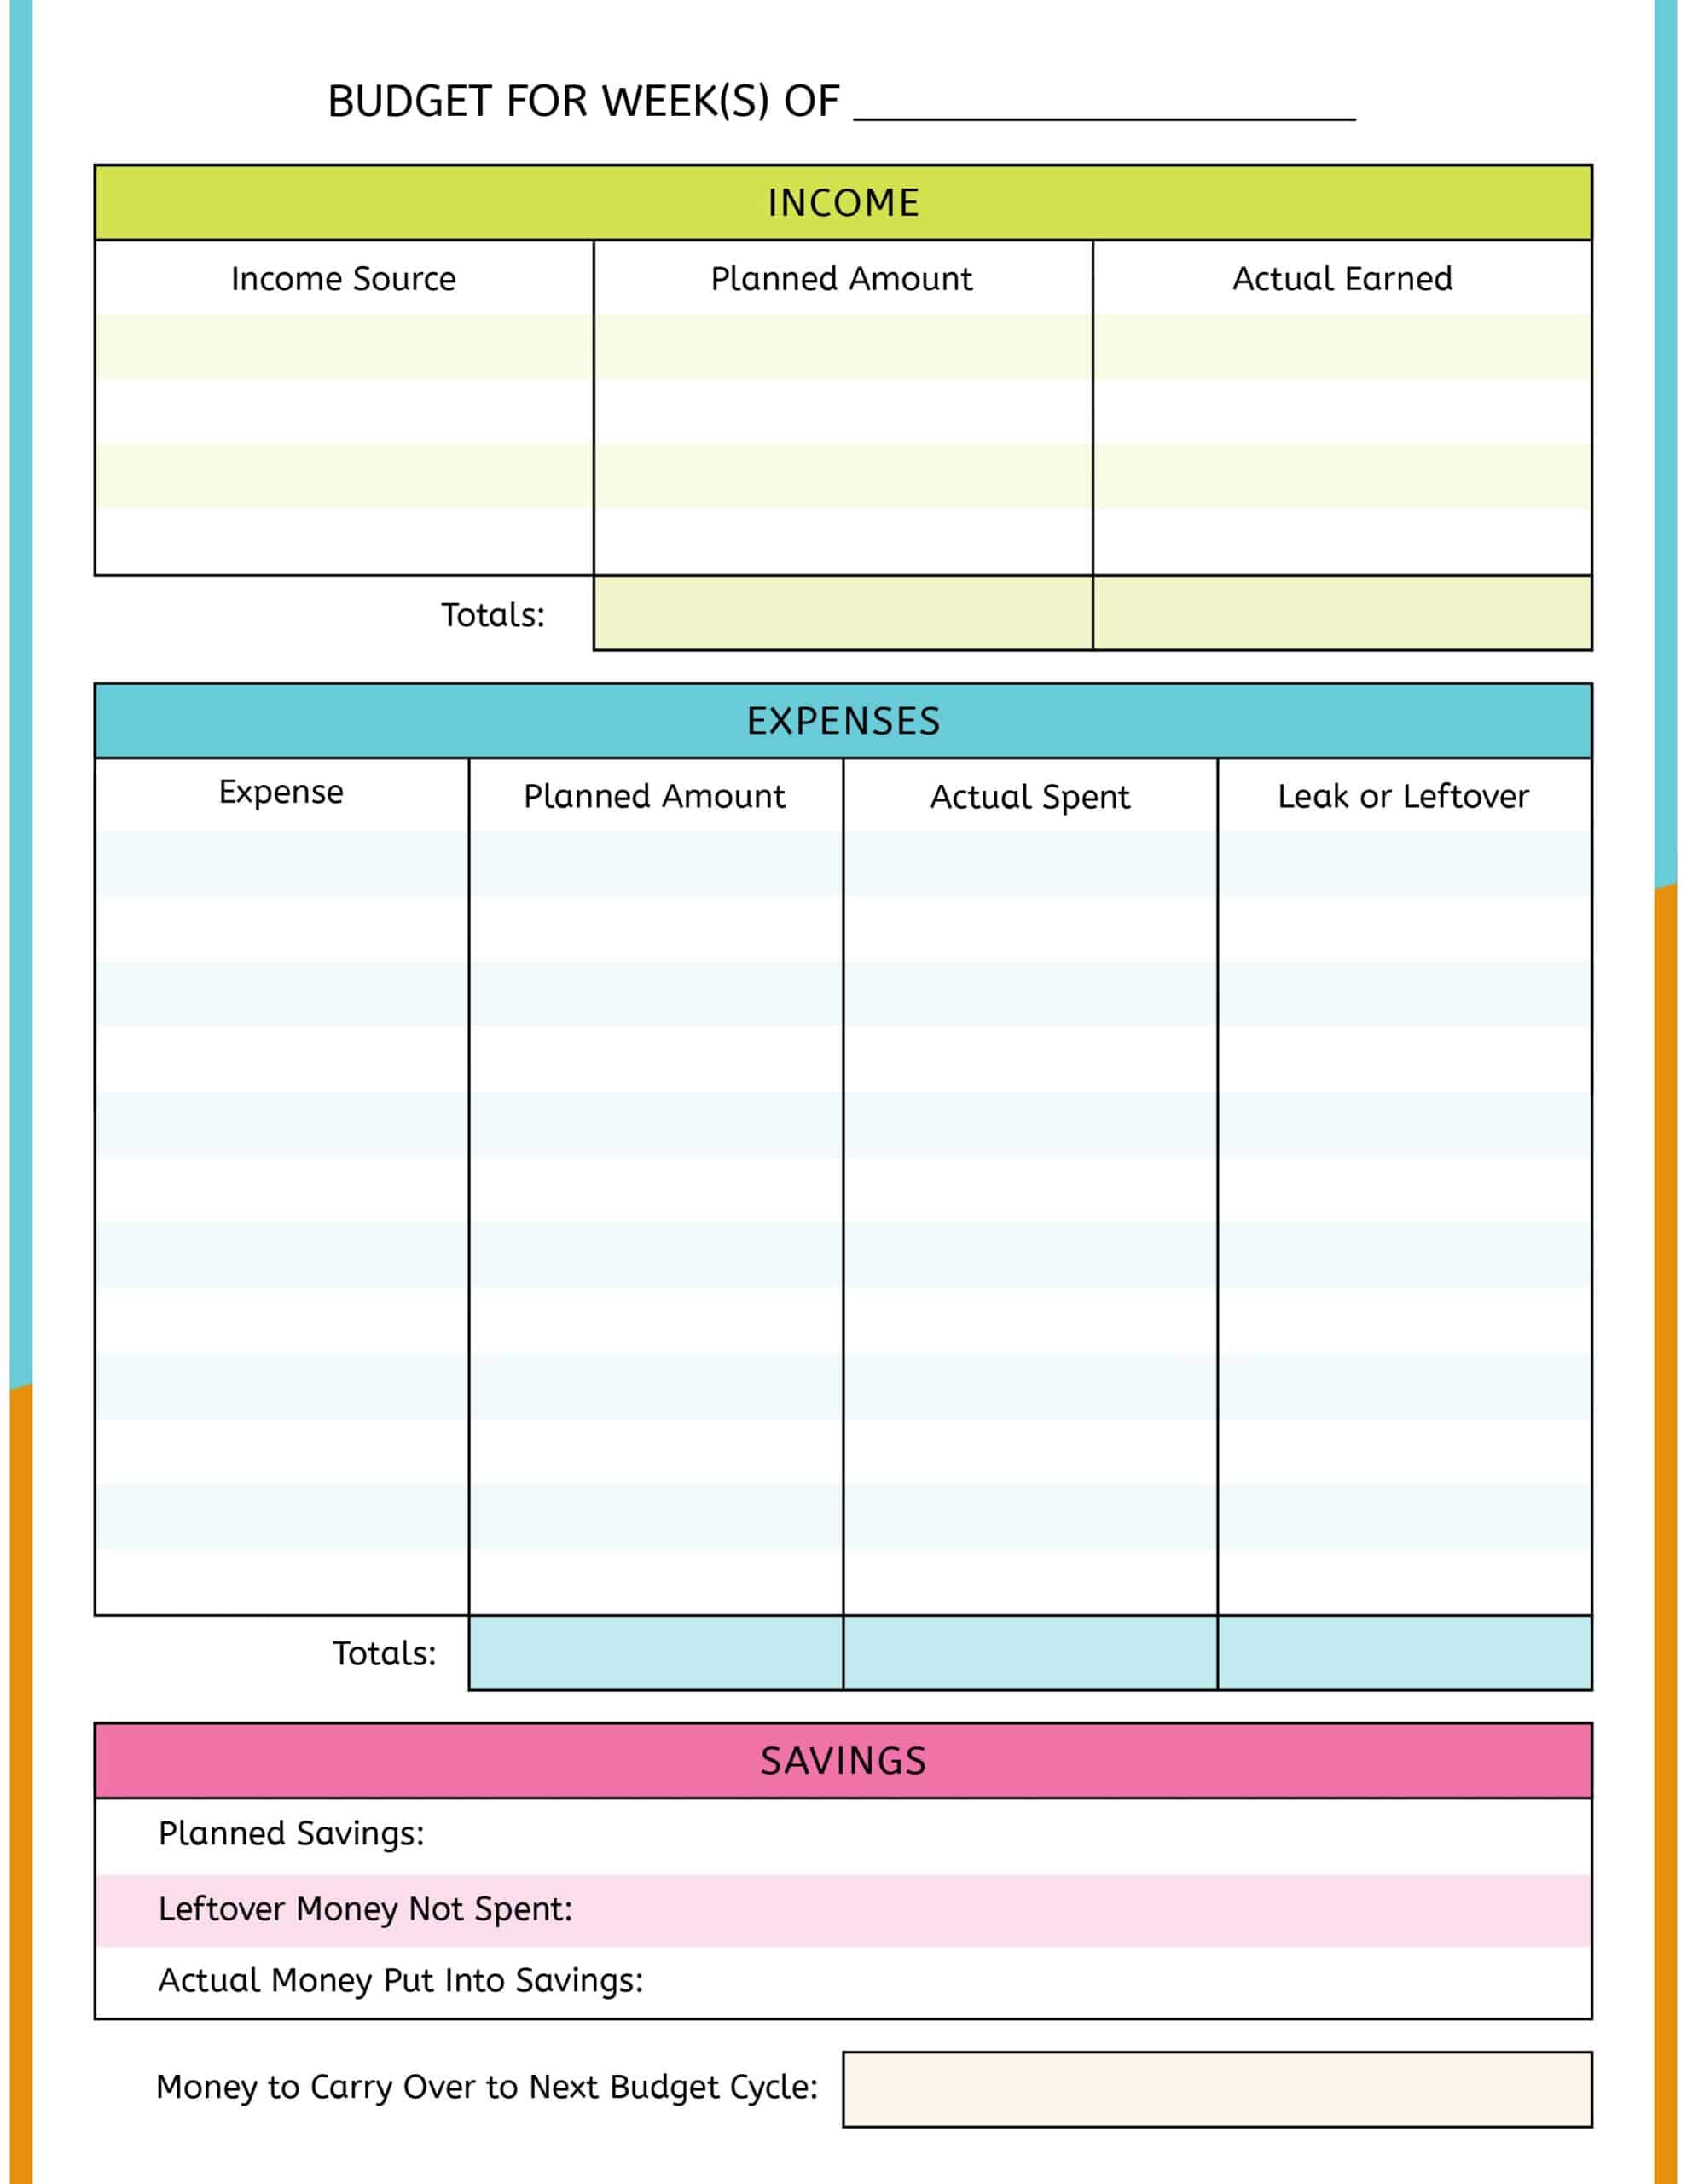 teen budget worksheet with blues, greens, orange, and pink, spot for income and expenses and savings - planned, actuals, and leak or leftovers